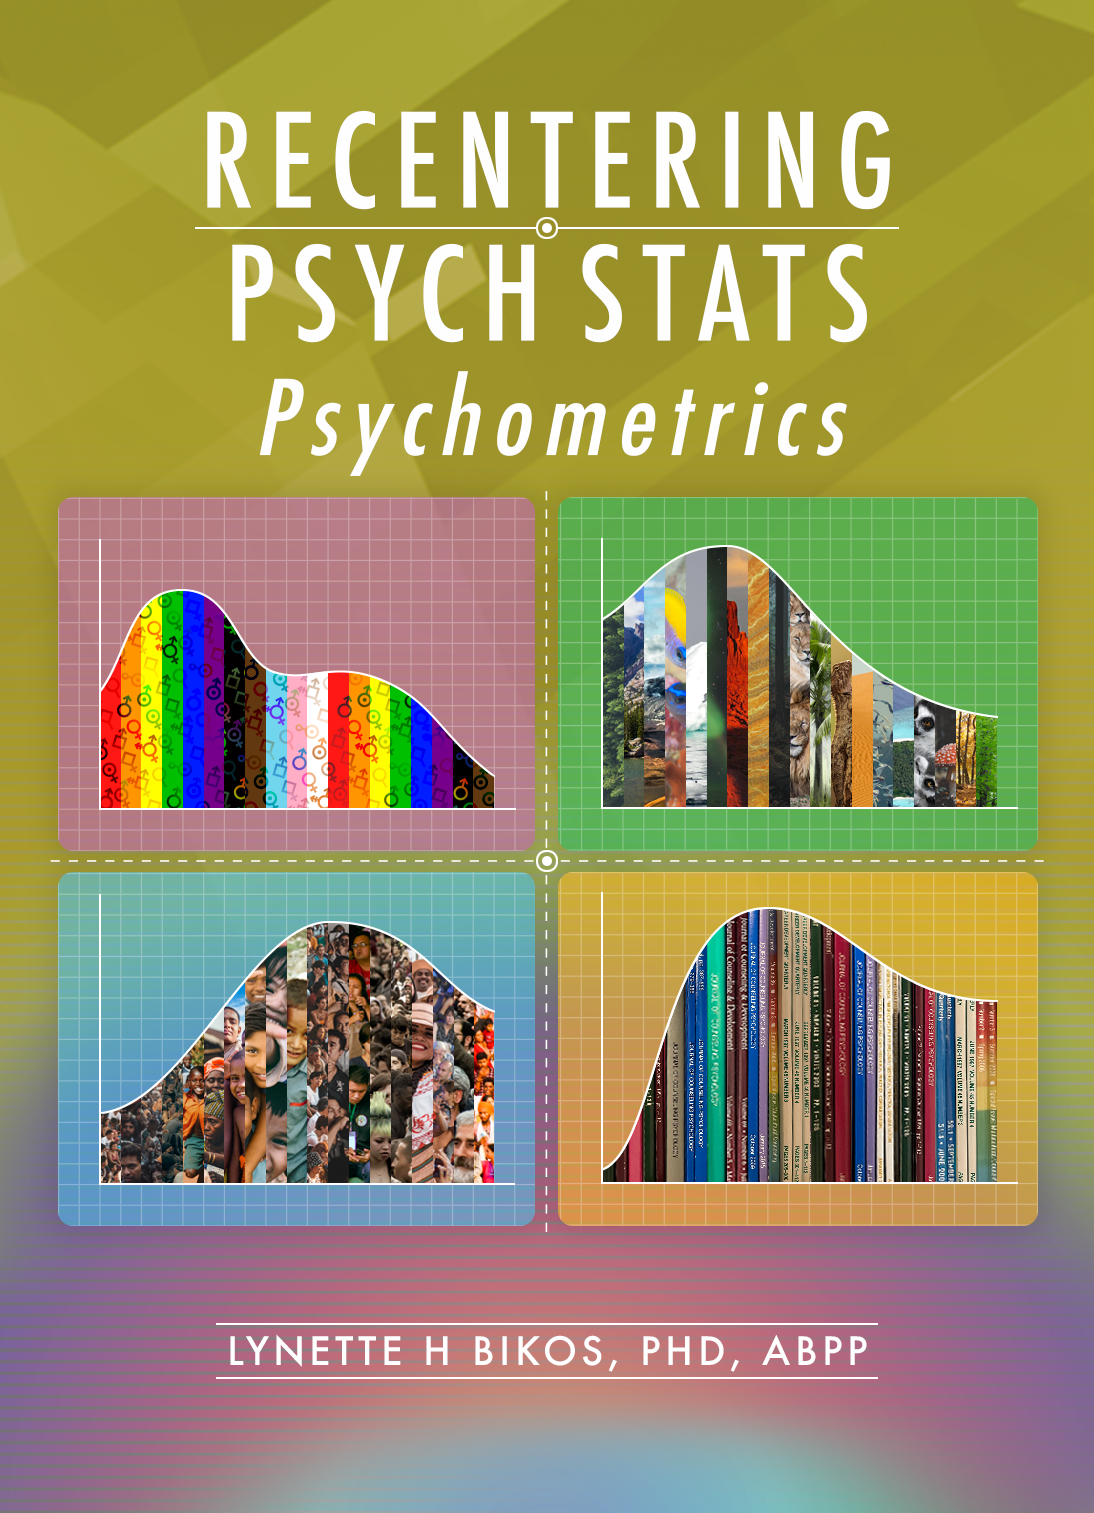 An image of the book cover. It includes four quadrants of non-normal distributions representing gender, race/ethnicty, sustainability/global concerns, and journal articles